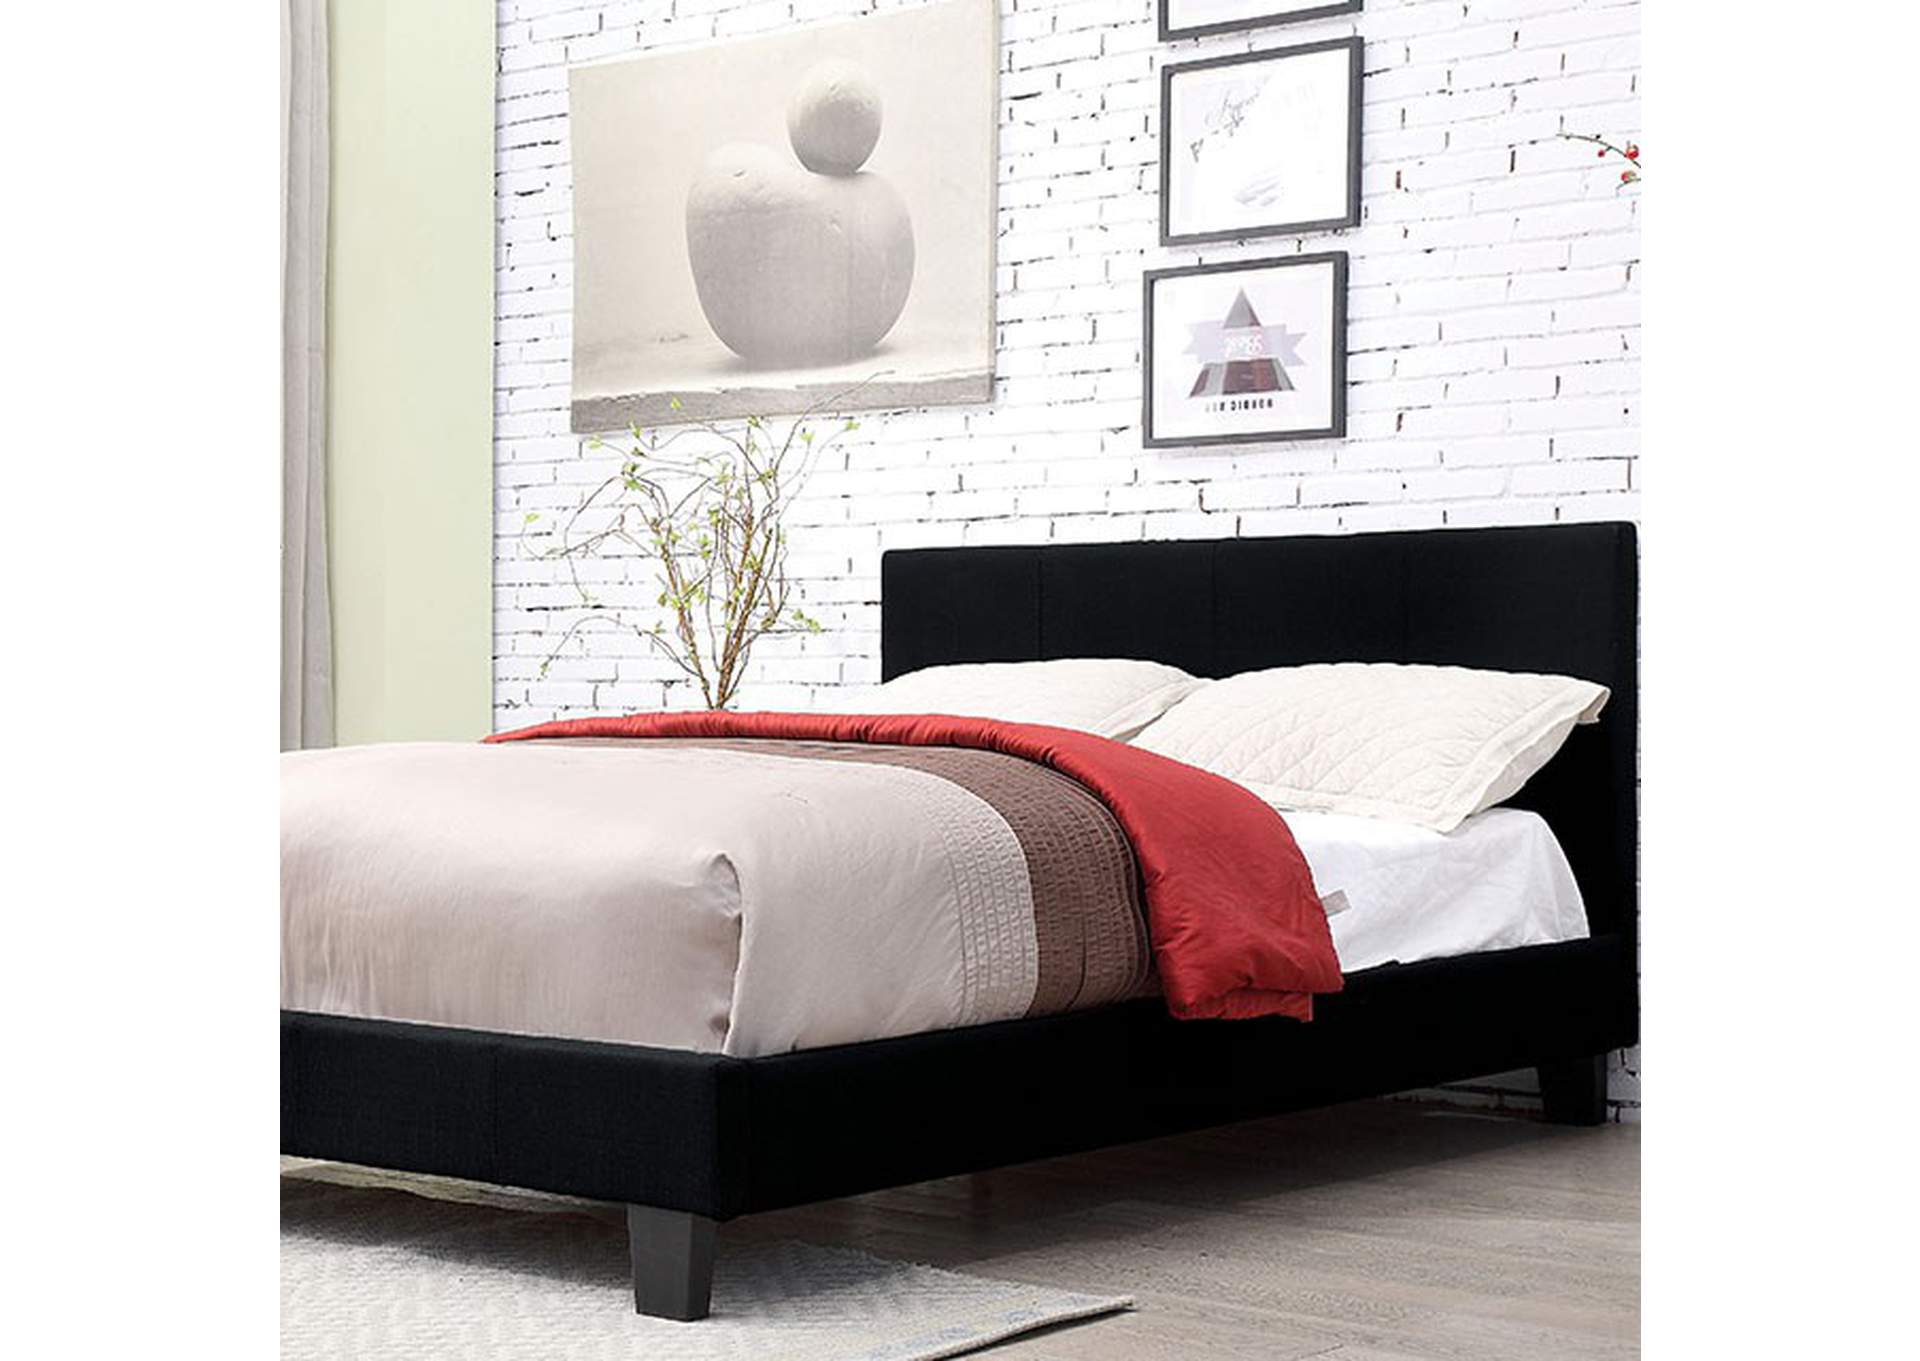 Sims Twin Bed,Furniture of America